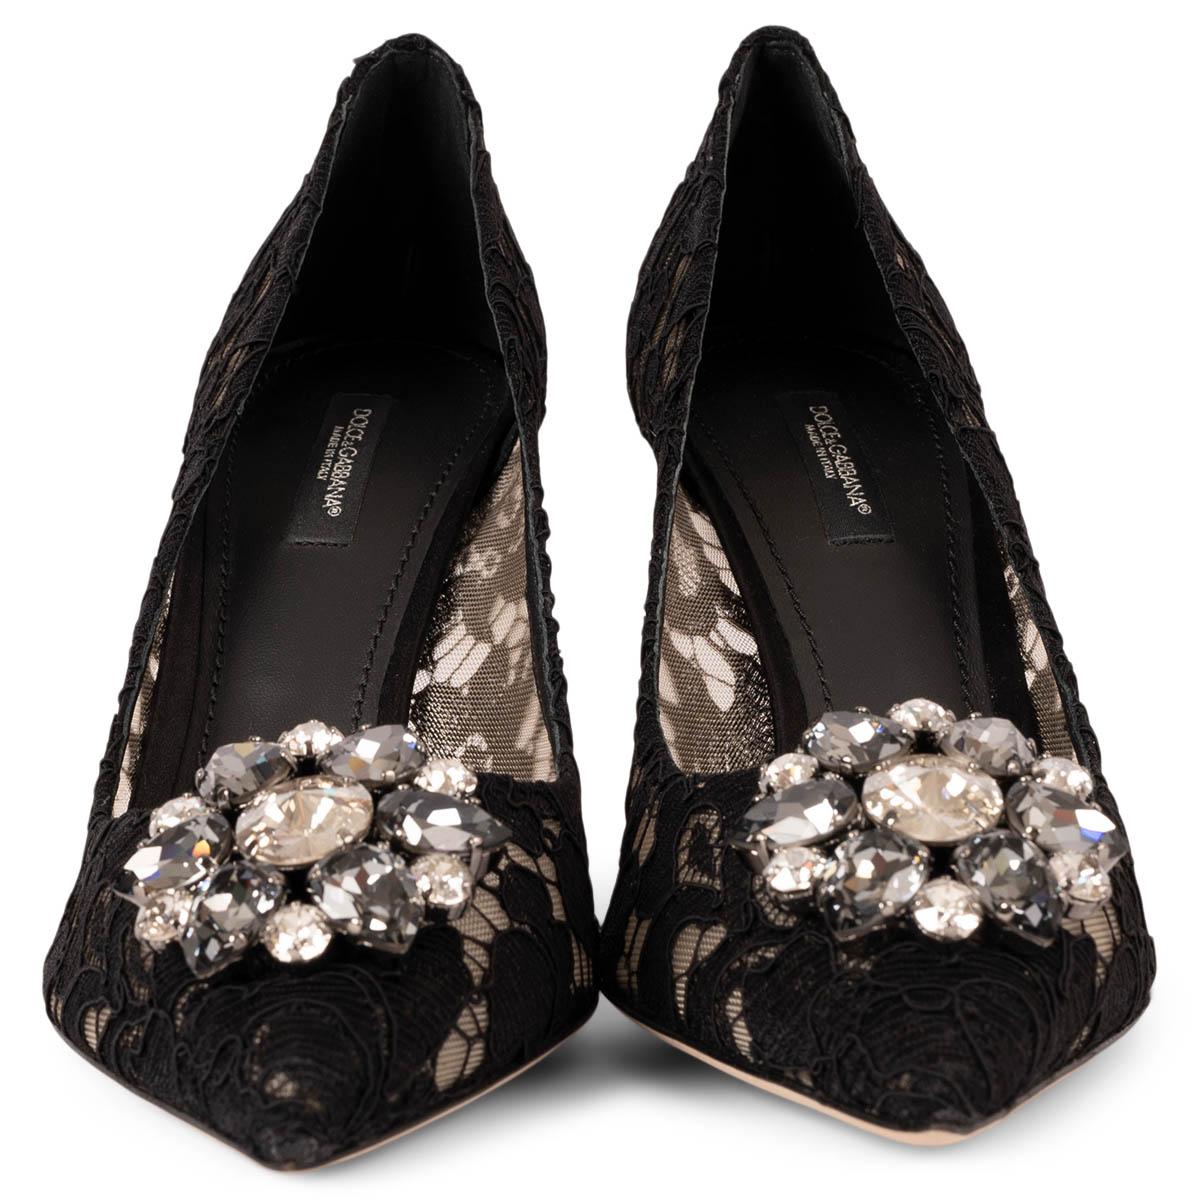 100% authentic Dolce & Gabbana Bellucci pumps in black intricate floral lace and adorned with dazzling crystal embellishment to the toe for a show-stopping finish. Have been worn once inside and are in virtually new condition.